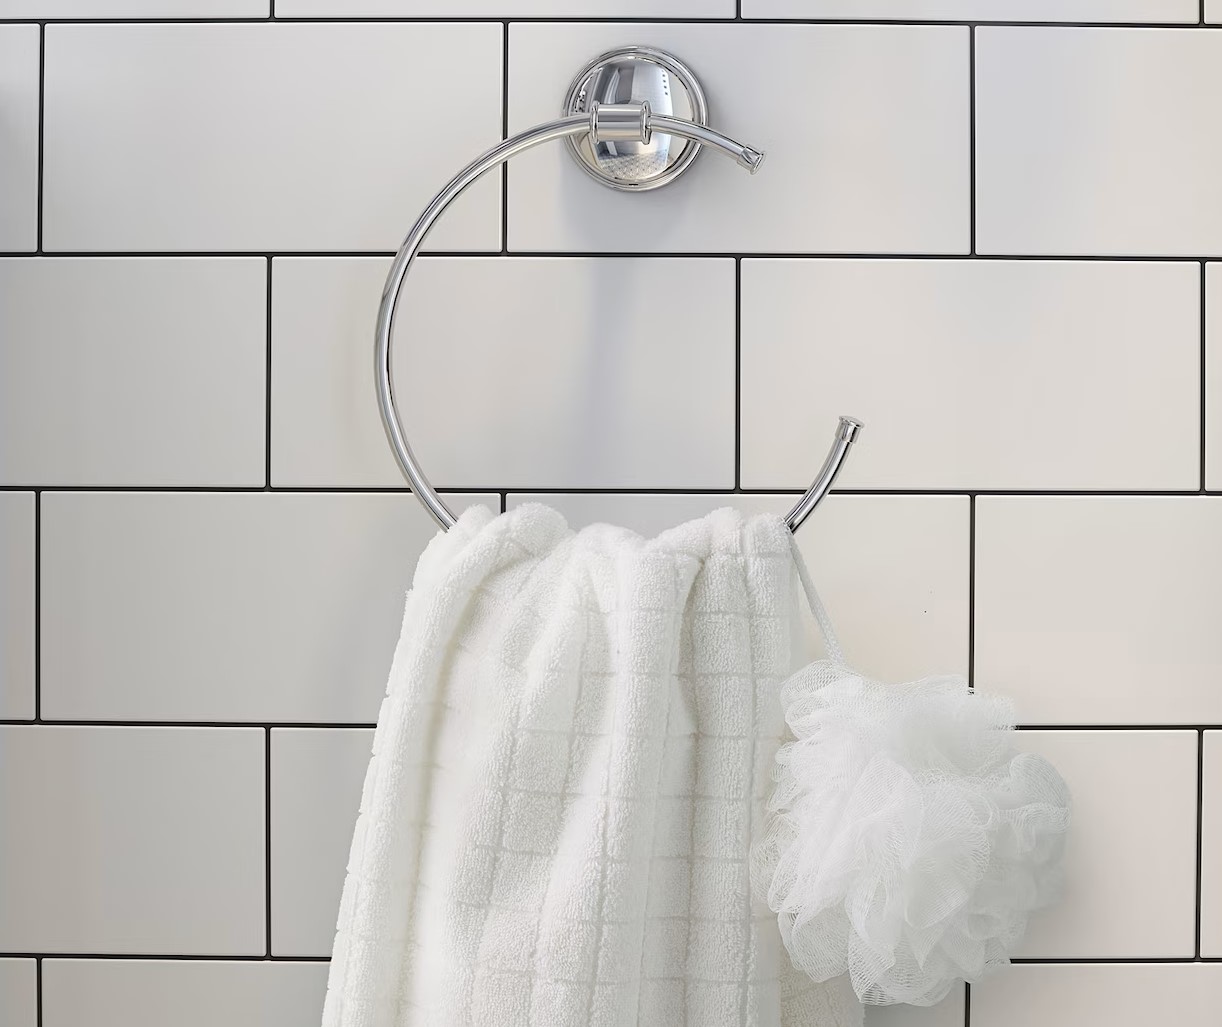 How To Remove Bathroom Towel Ring That Won’t Come Off